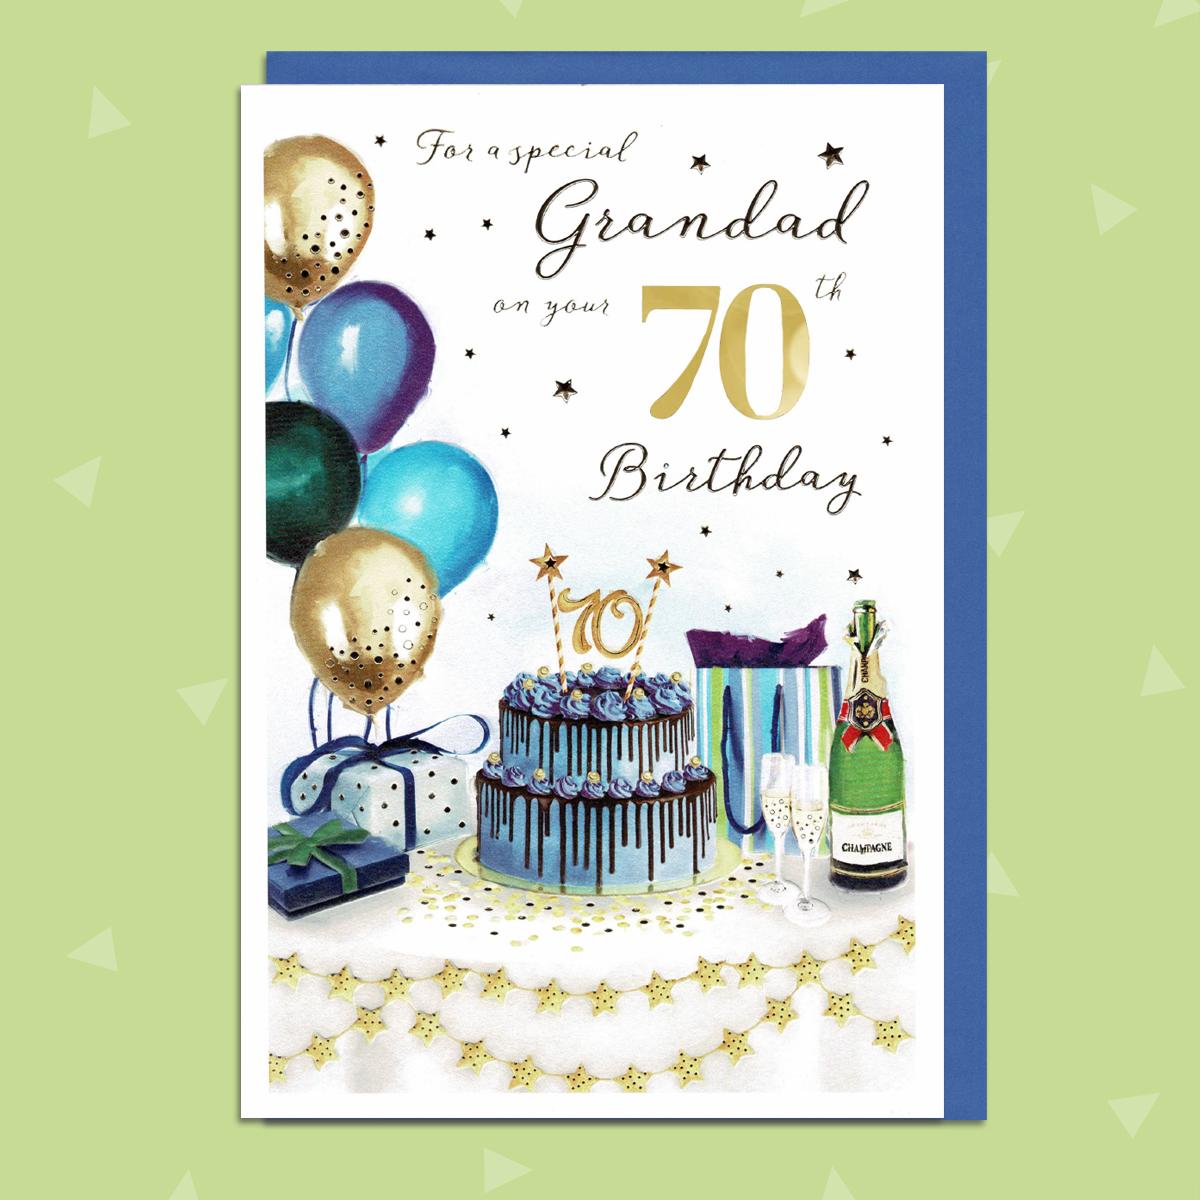 Grandad Age 70 Birthday Card Featuring A Birthday Table Full Of Cake, Balloons And Booze